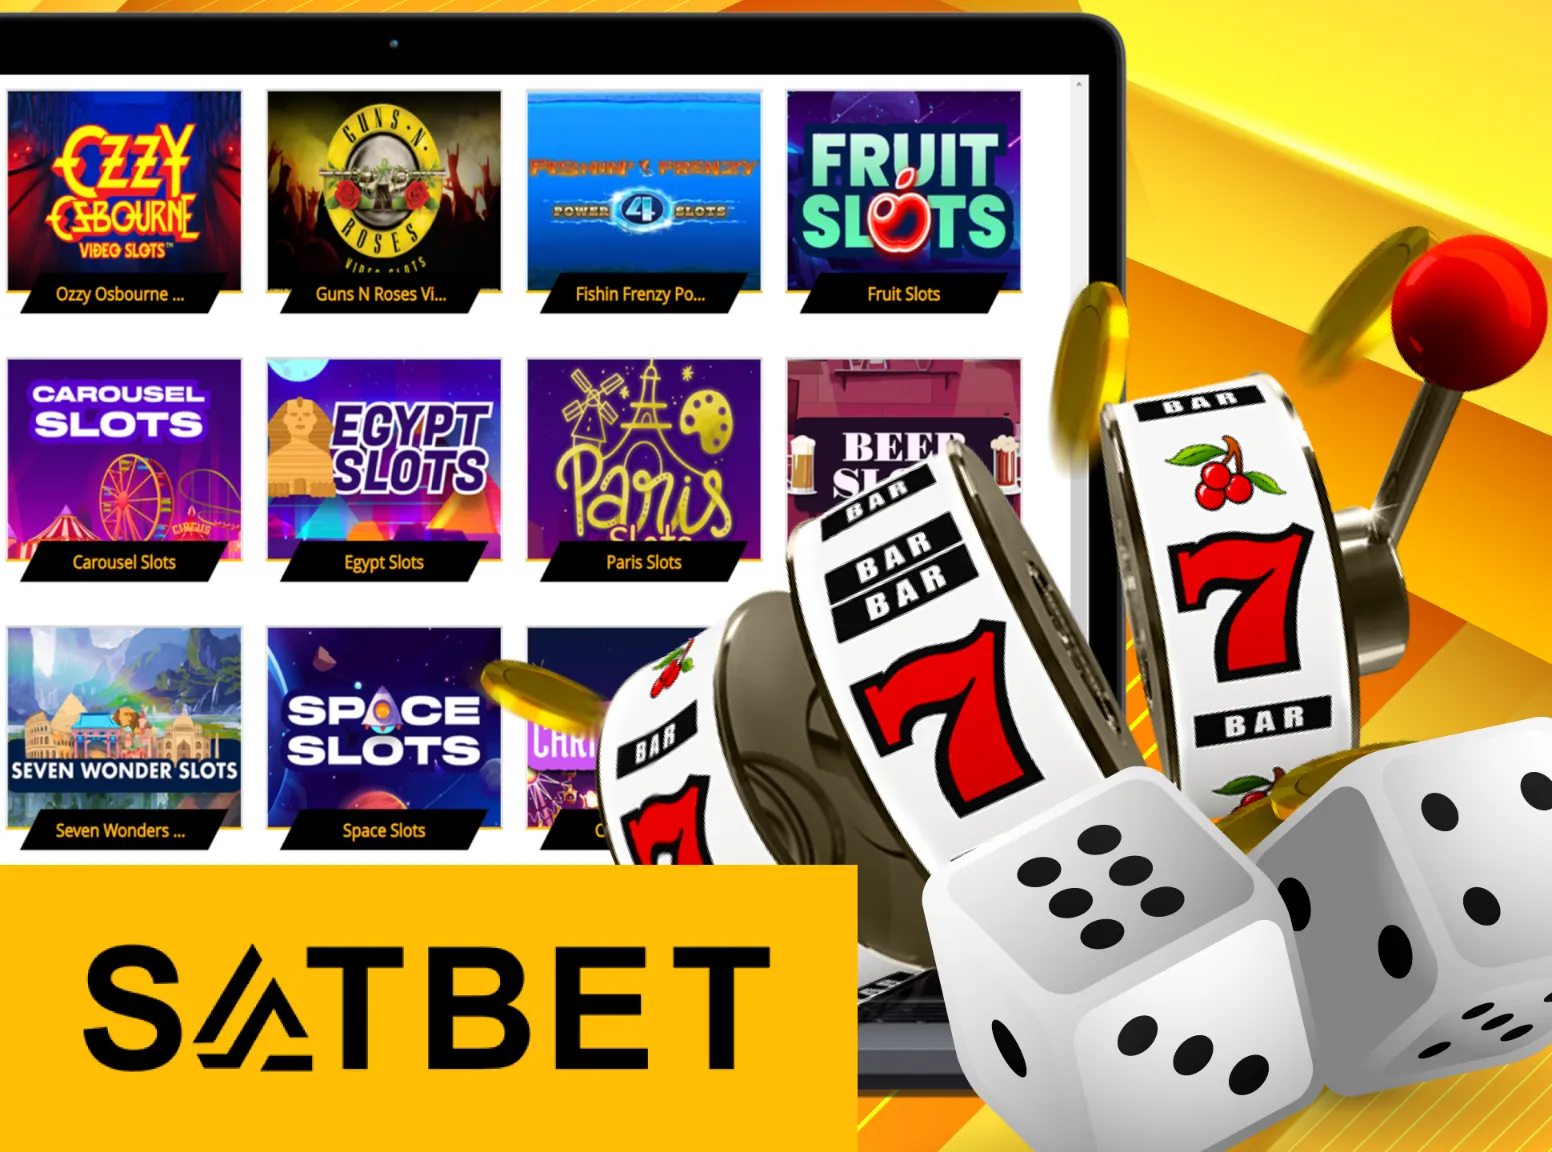 Search for your favourite slots at Satbet.